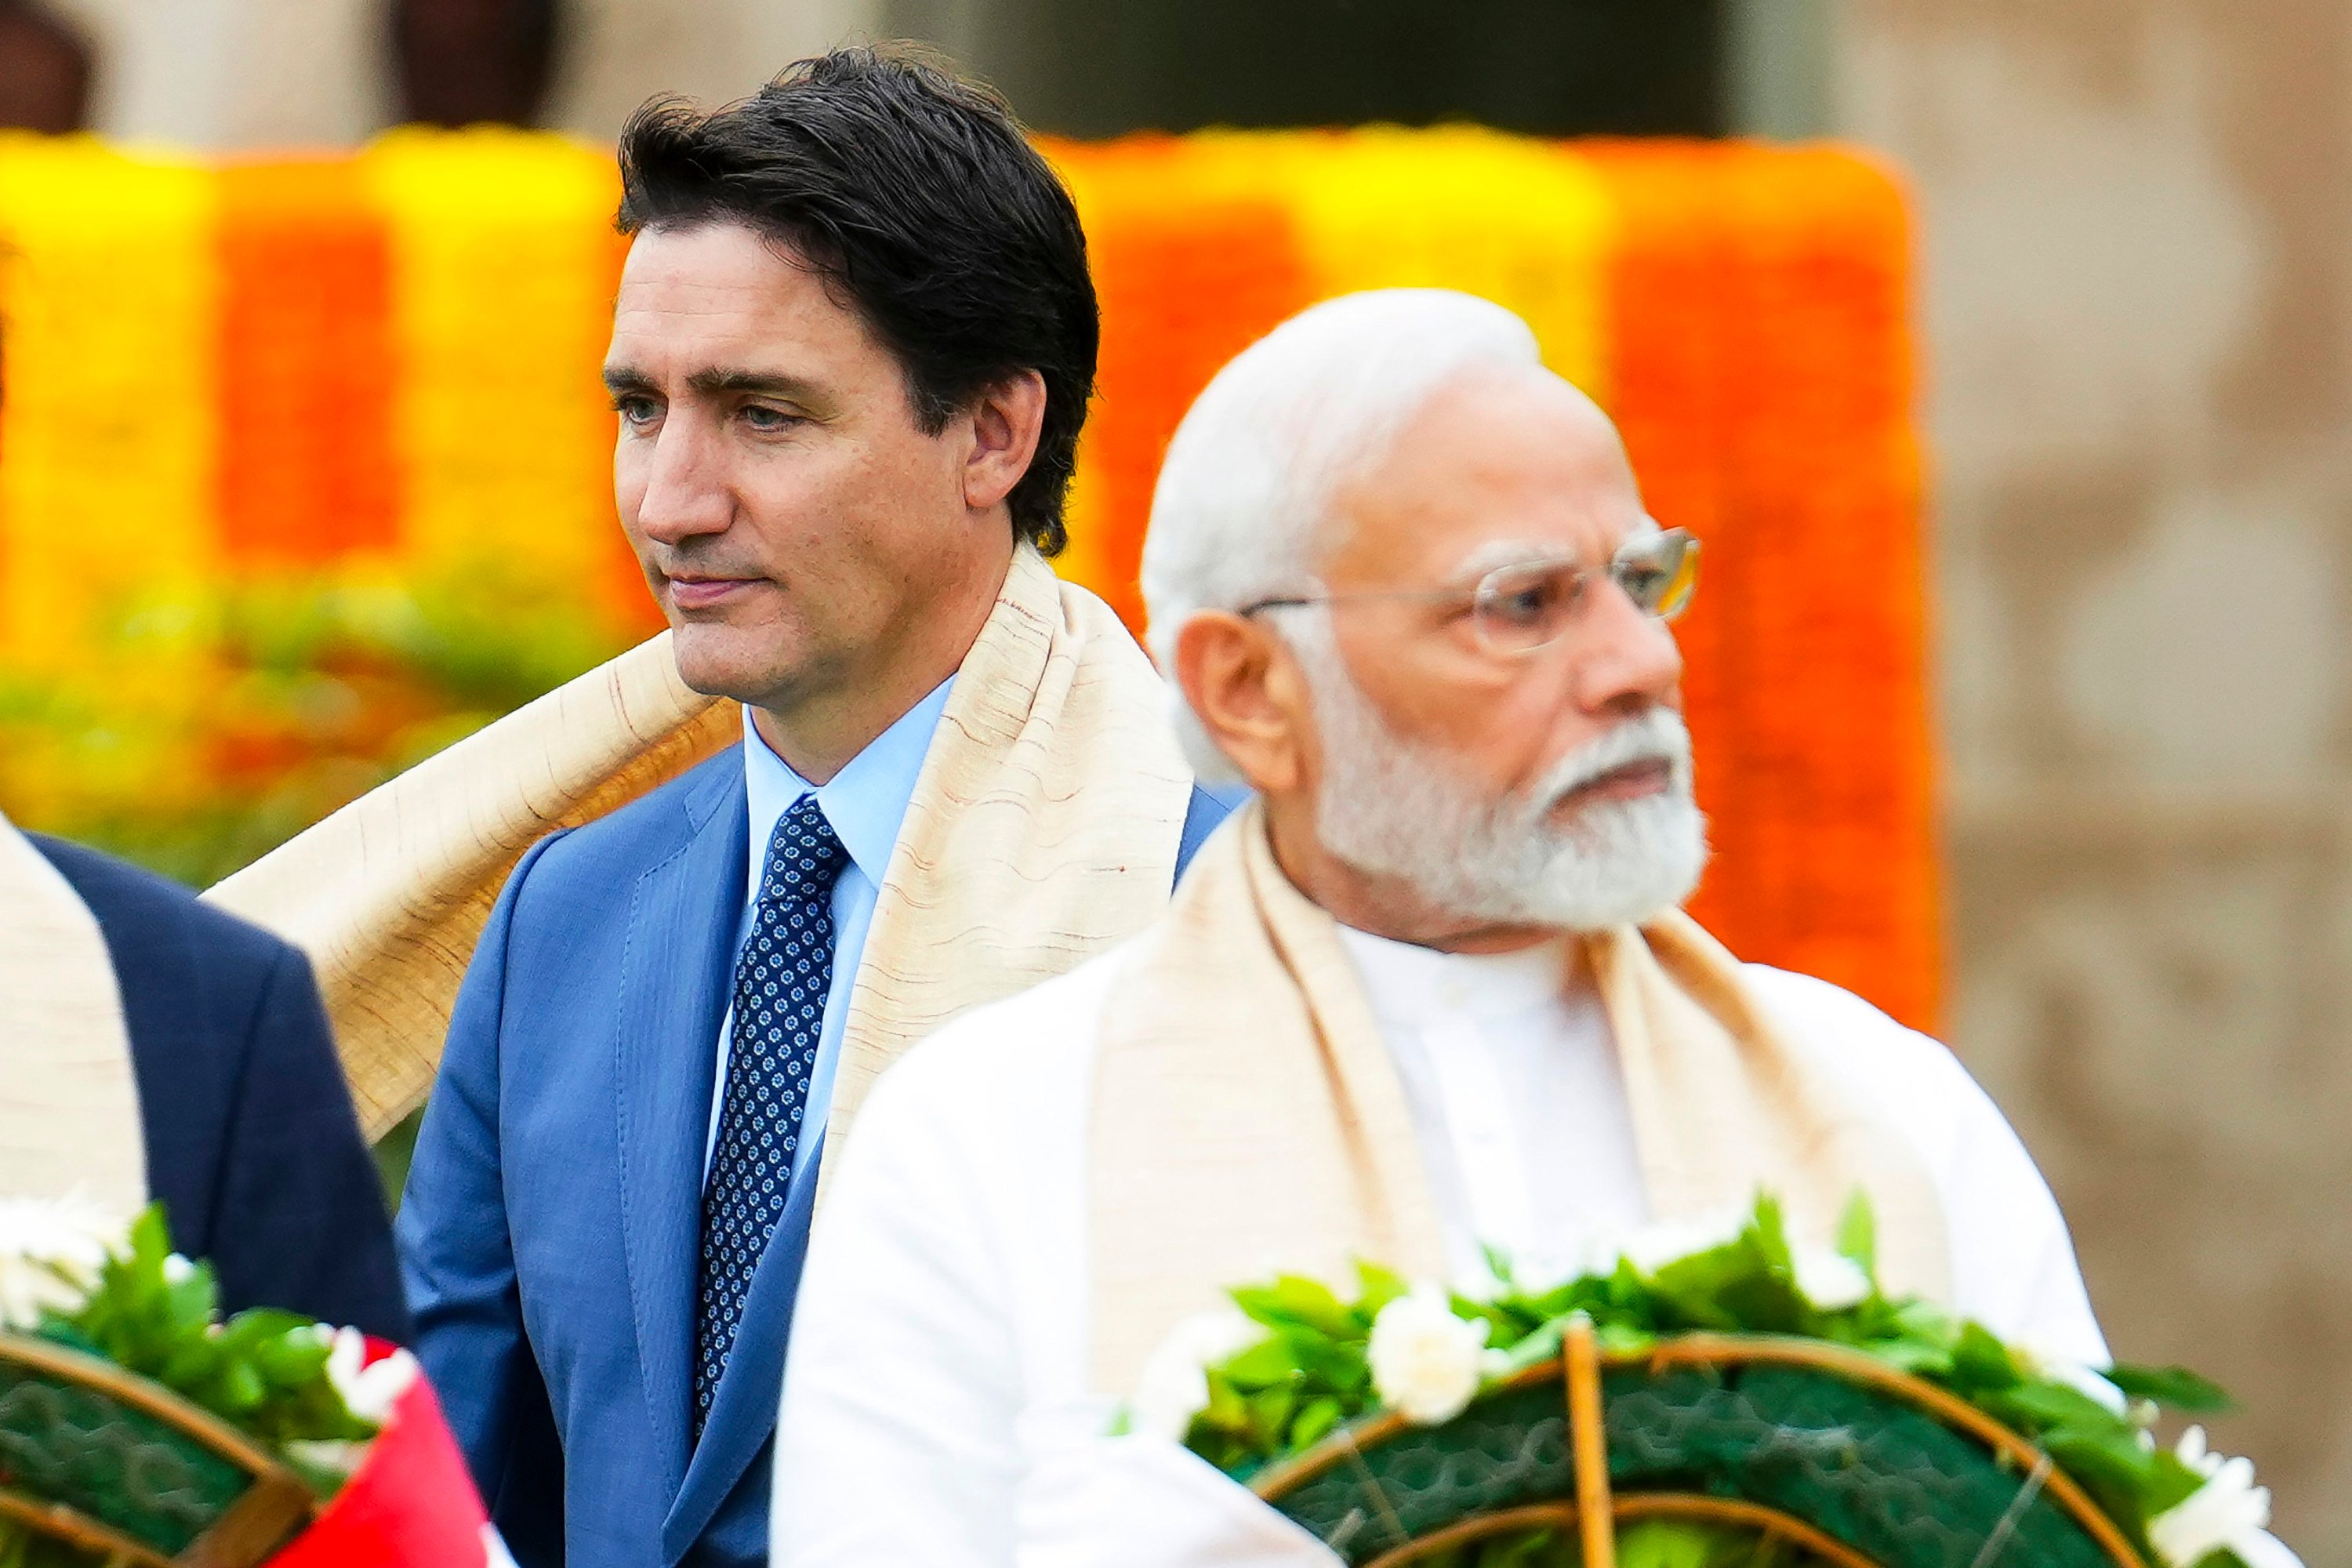 Canada’s Prime Minister Justin Trudeau and Indian Prime Minister Narendra Modi during this month’s G20 summit. Photo: via AP